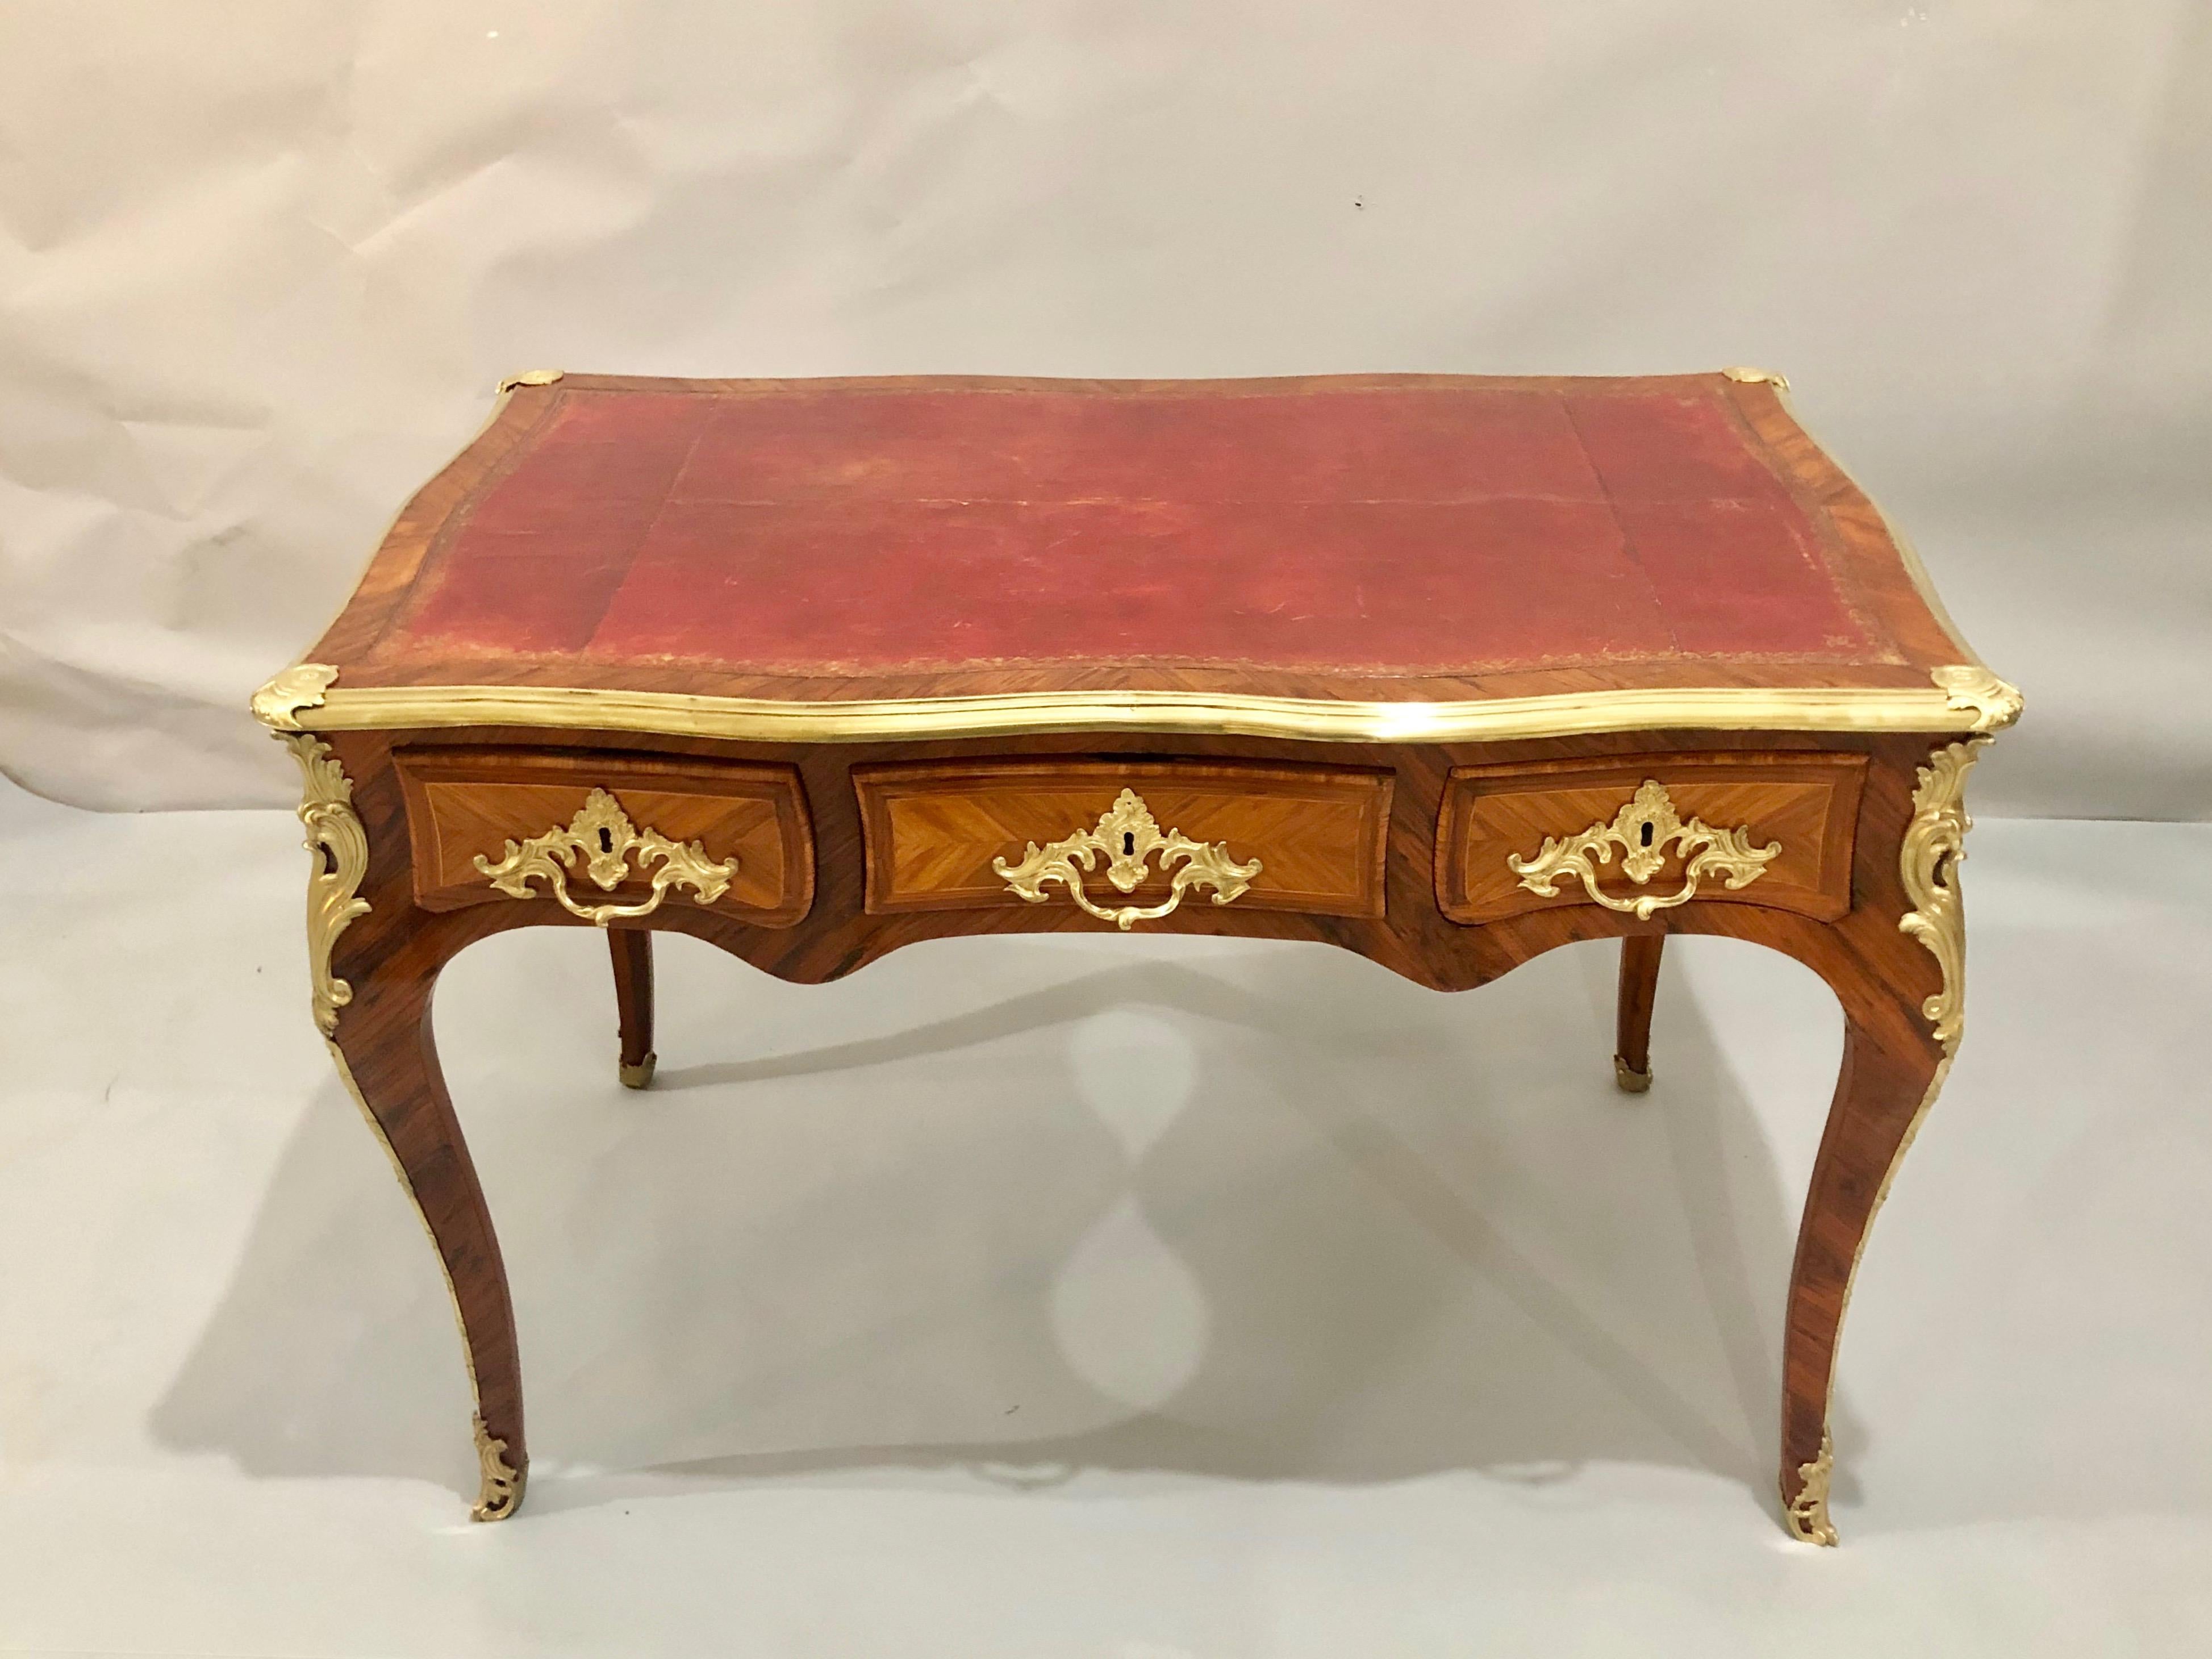 Extraordinary Louis XV style bureau plat desk by Edward Holmes Baldock, with its petite portions will fit comfortably into small spaces. 18th century bureau plats or writing tables were also called library tables as they were often found in the home